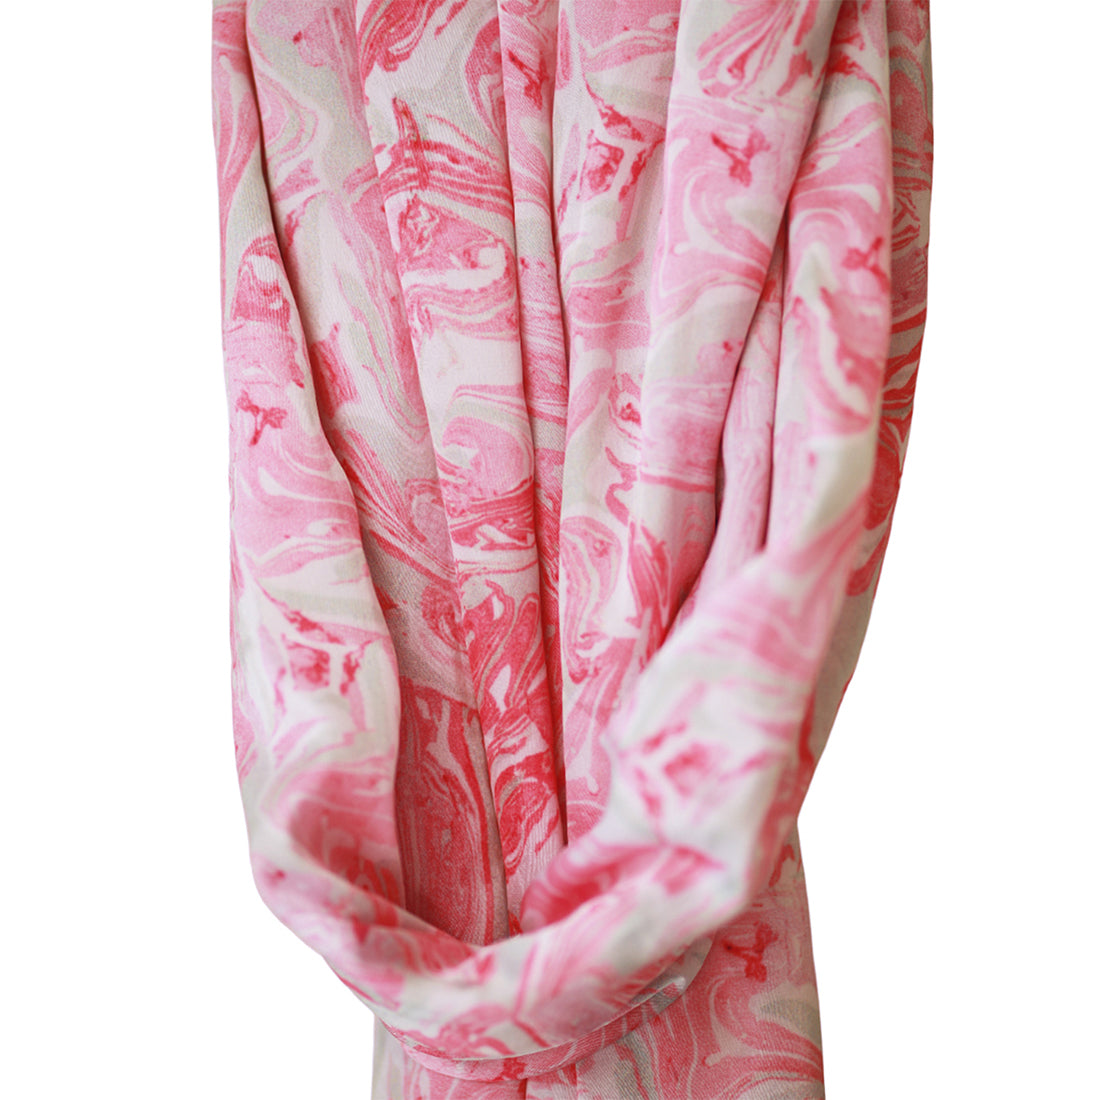 Grey & Pink Marble Print Multipurpose Satin Scarf in Grey and Pink for Daily and Party purpose for Women